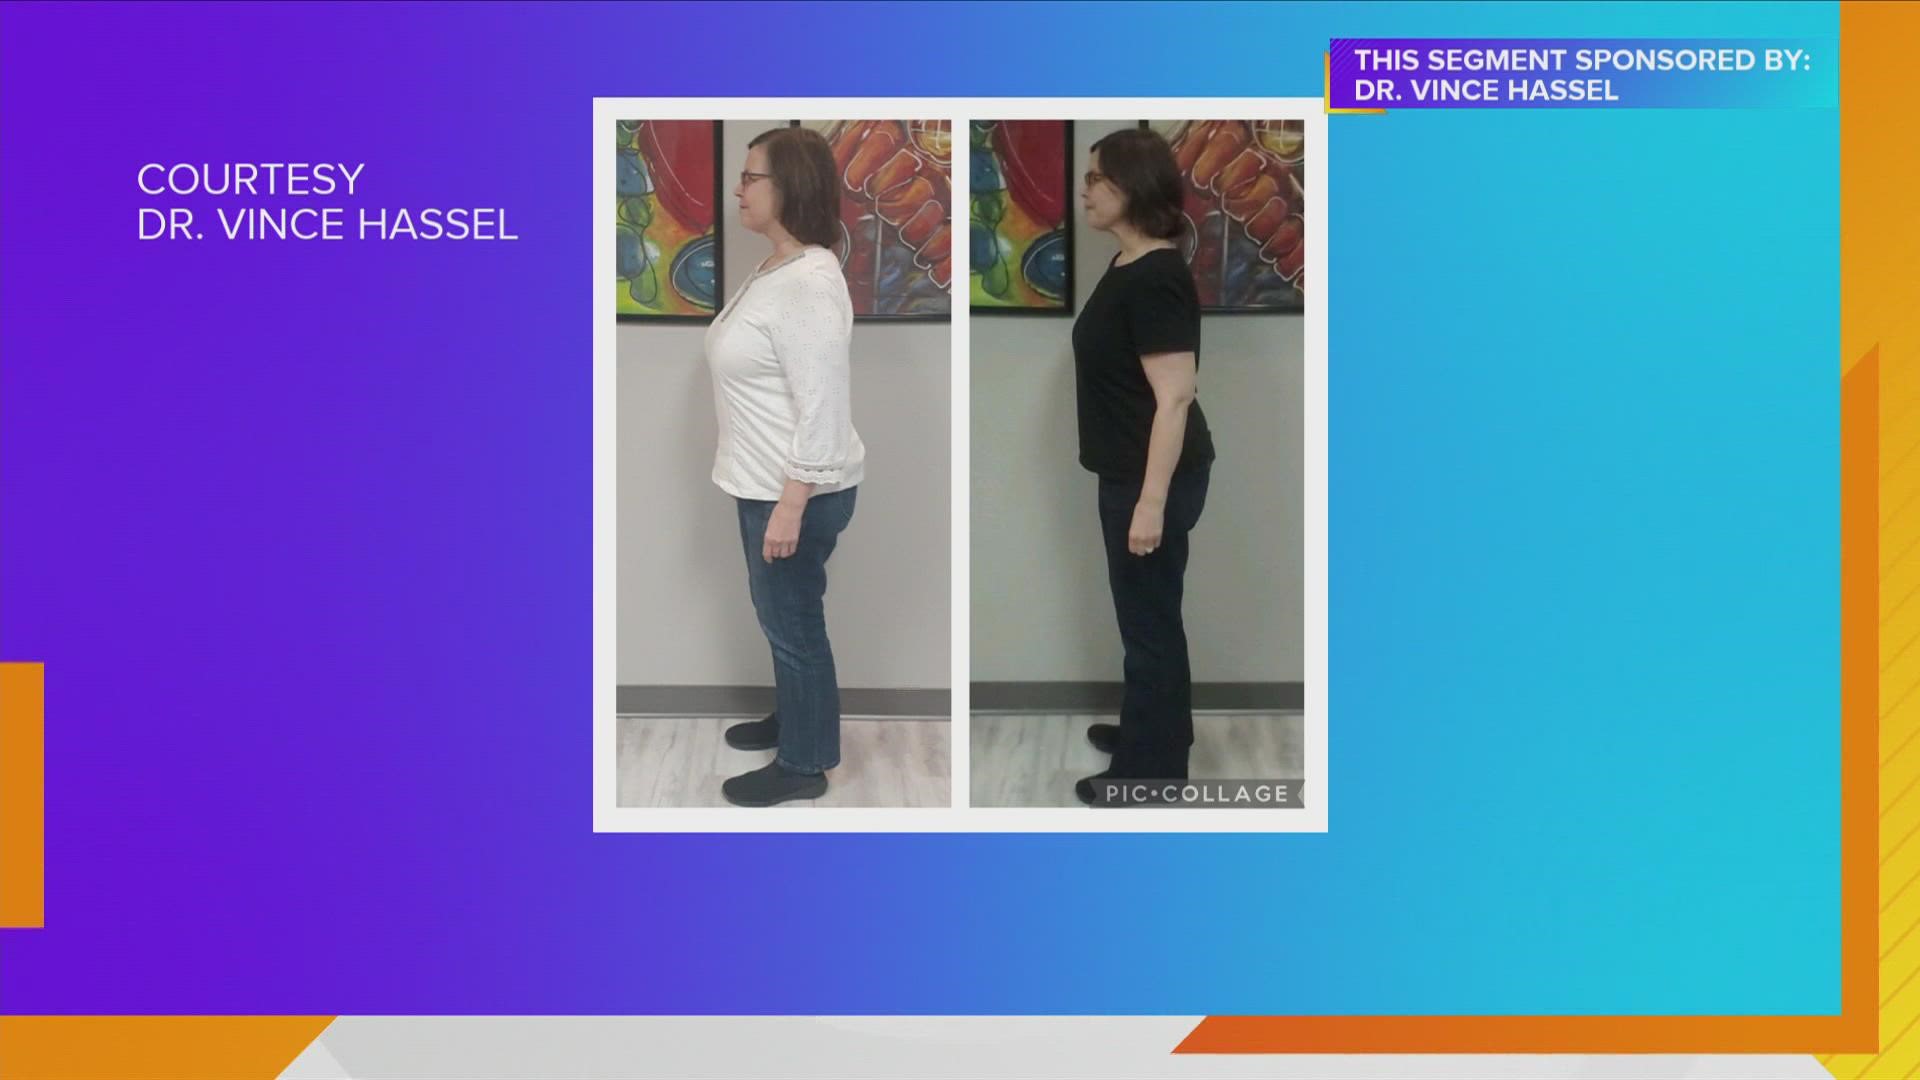 Kim Heggen wishes she wouldn't have waited to call Dr. Vince Hassel to get started on the ChiroThin weight loss program because it worked! | Paid Content